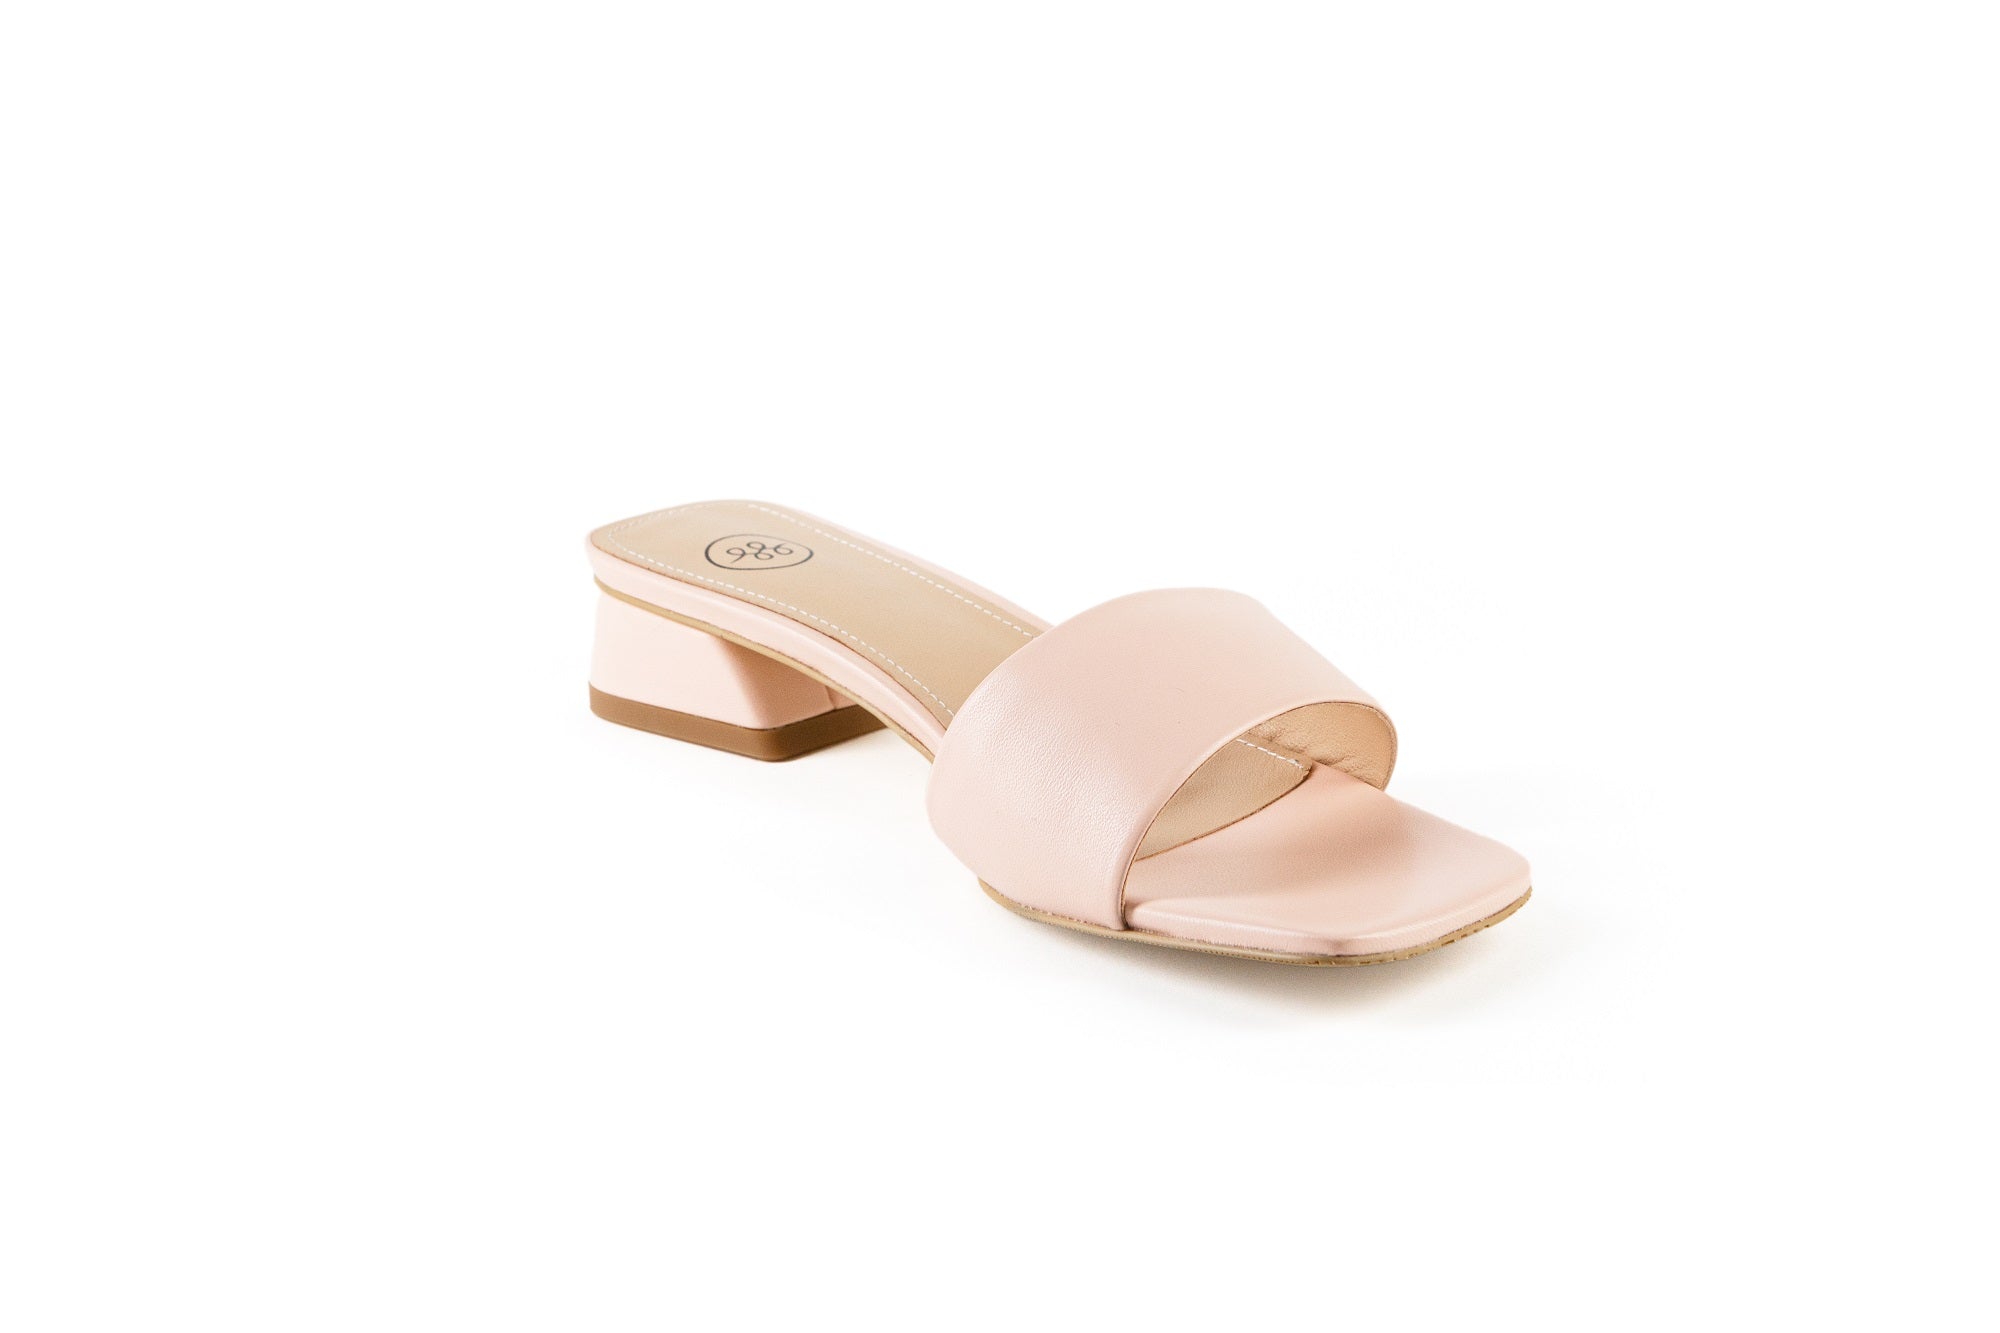 Marbella Sandal Pink Flats by Sole Shoes NZ F18-36